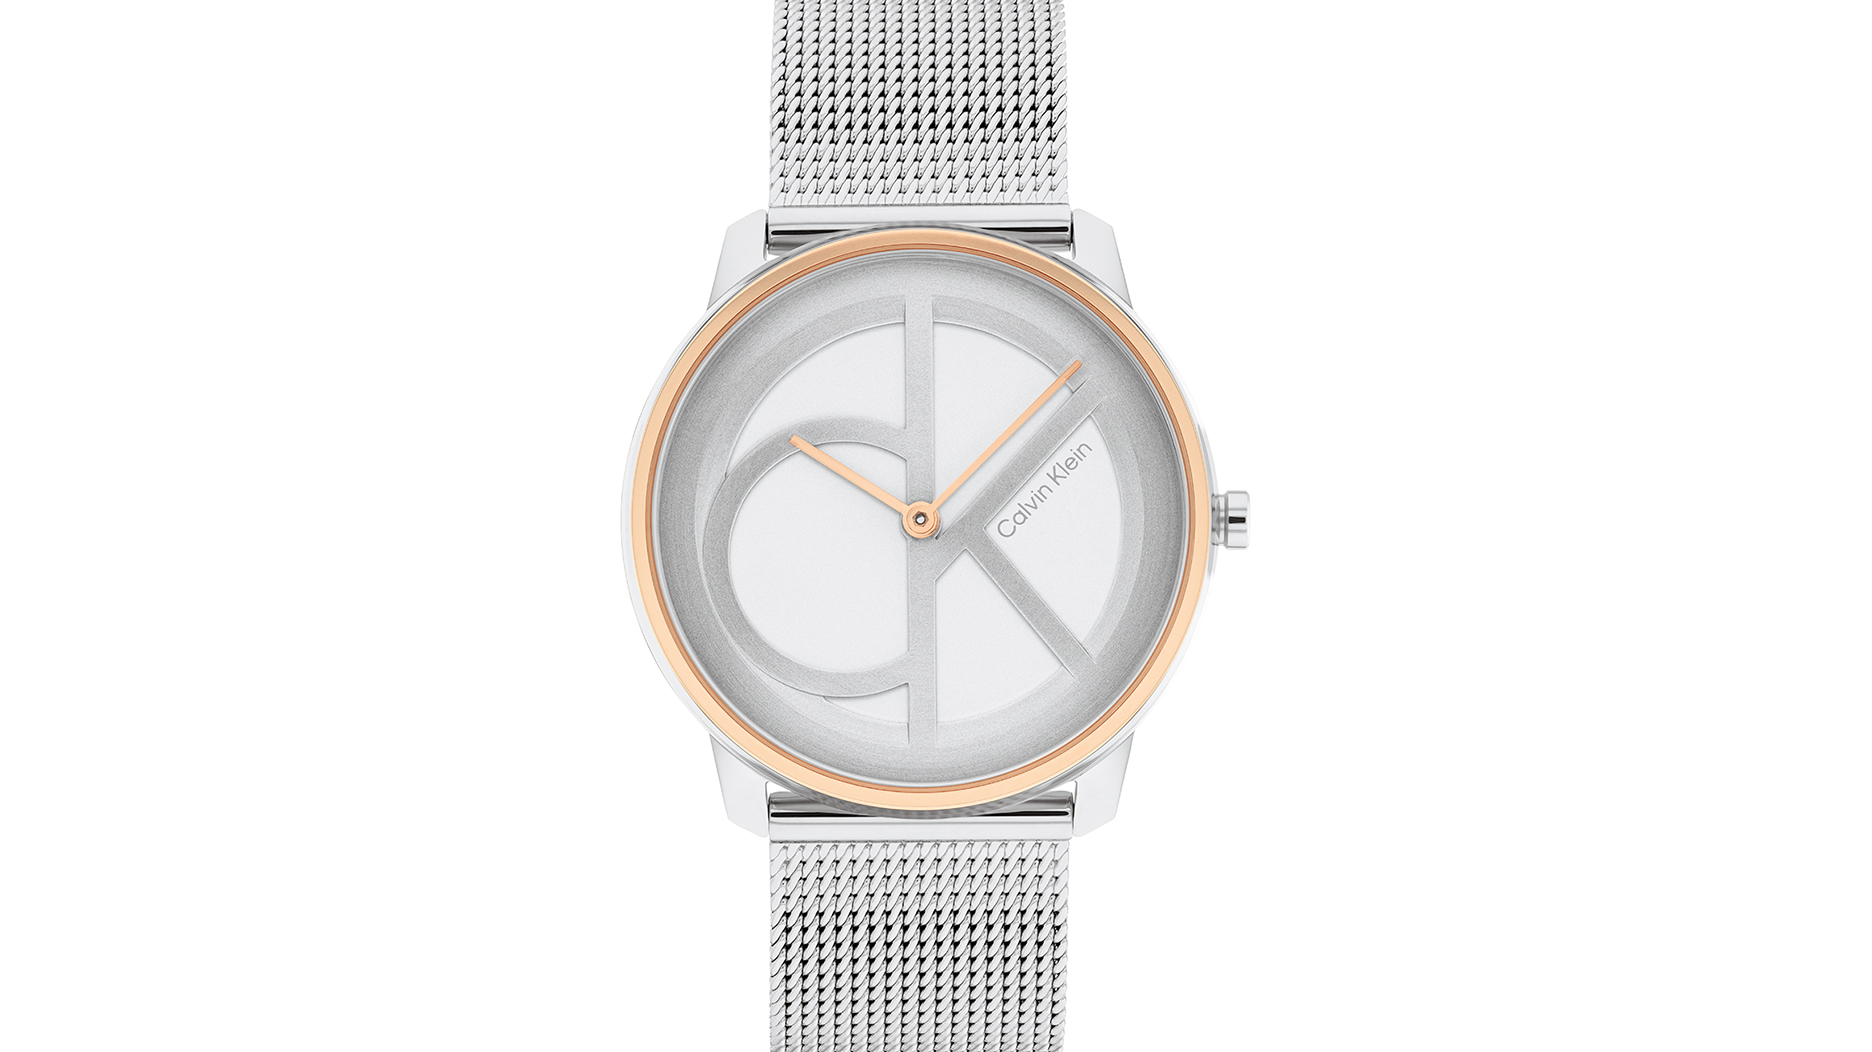 Movado Launches First Calvin Klein Collection Under New Licensing Deal |  National Jeweler